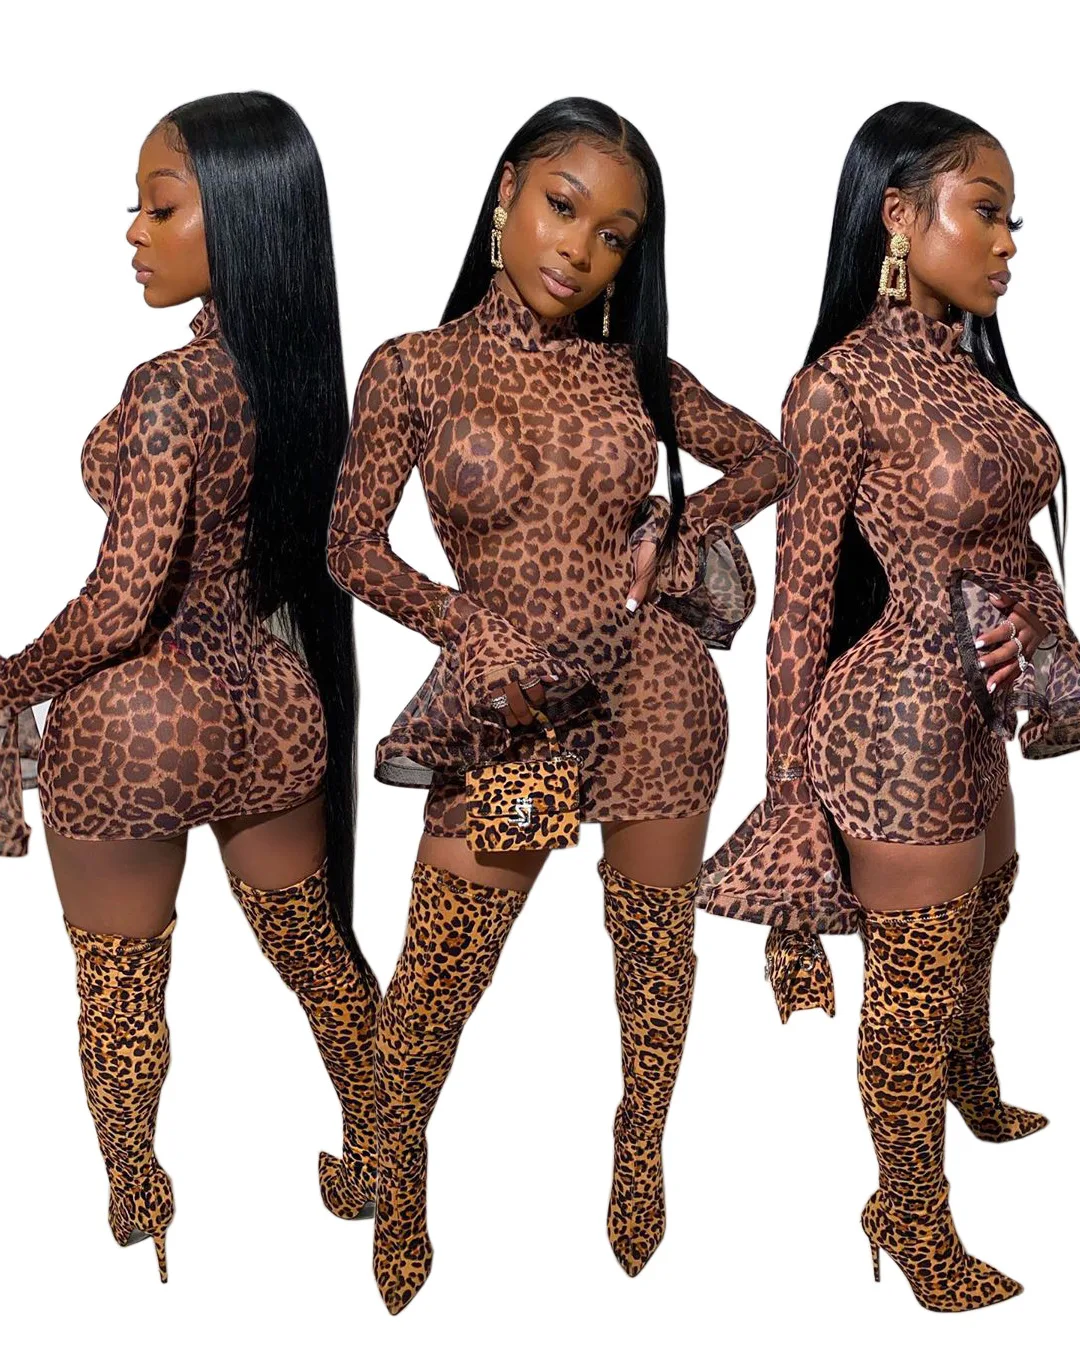 

2021 Summer fashion Women Clothes Hot Night Club Wear Sexy Casual Leopard Printed Long Flare Sleeve bodycon mini dresses, As picture or customized make